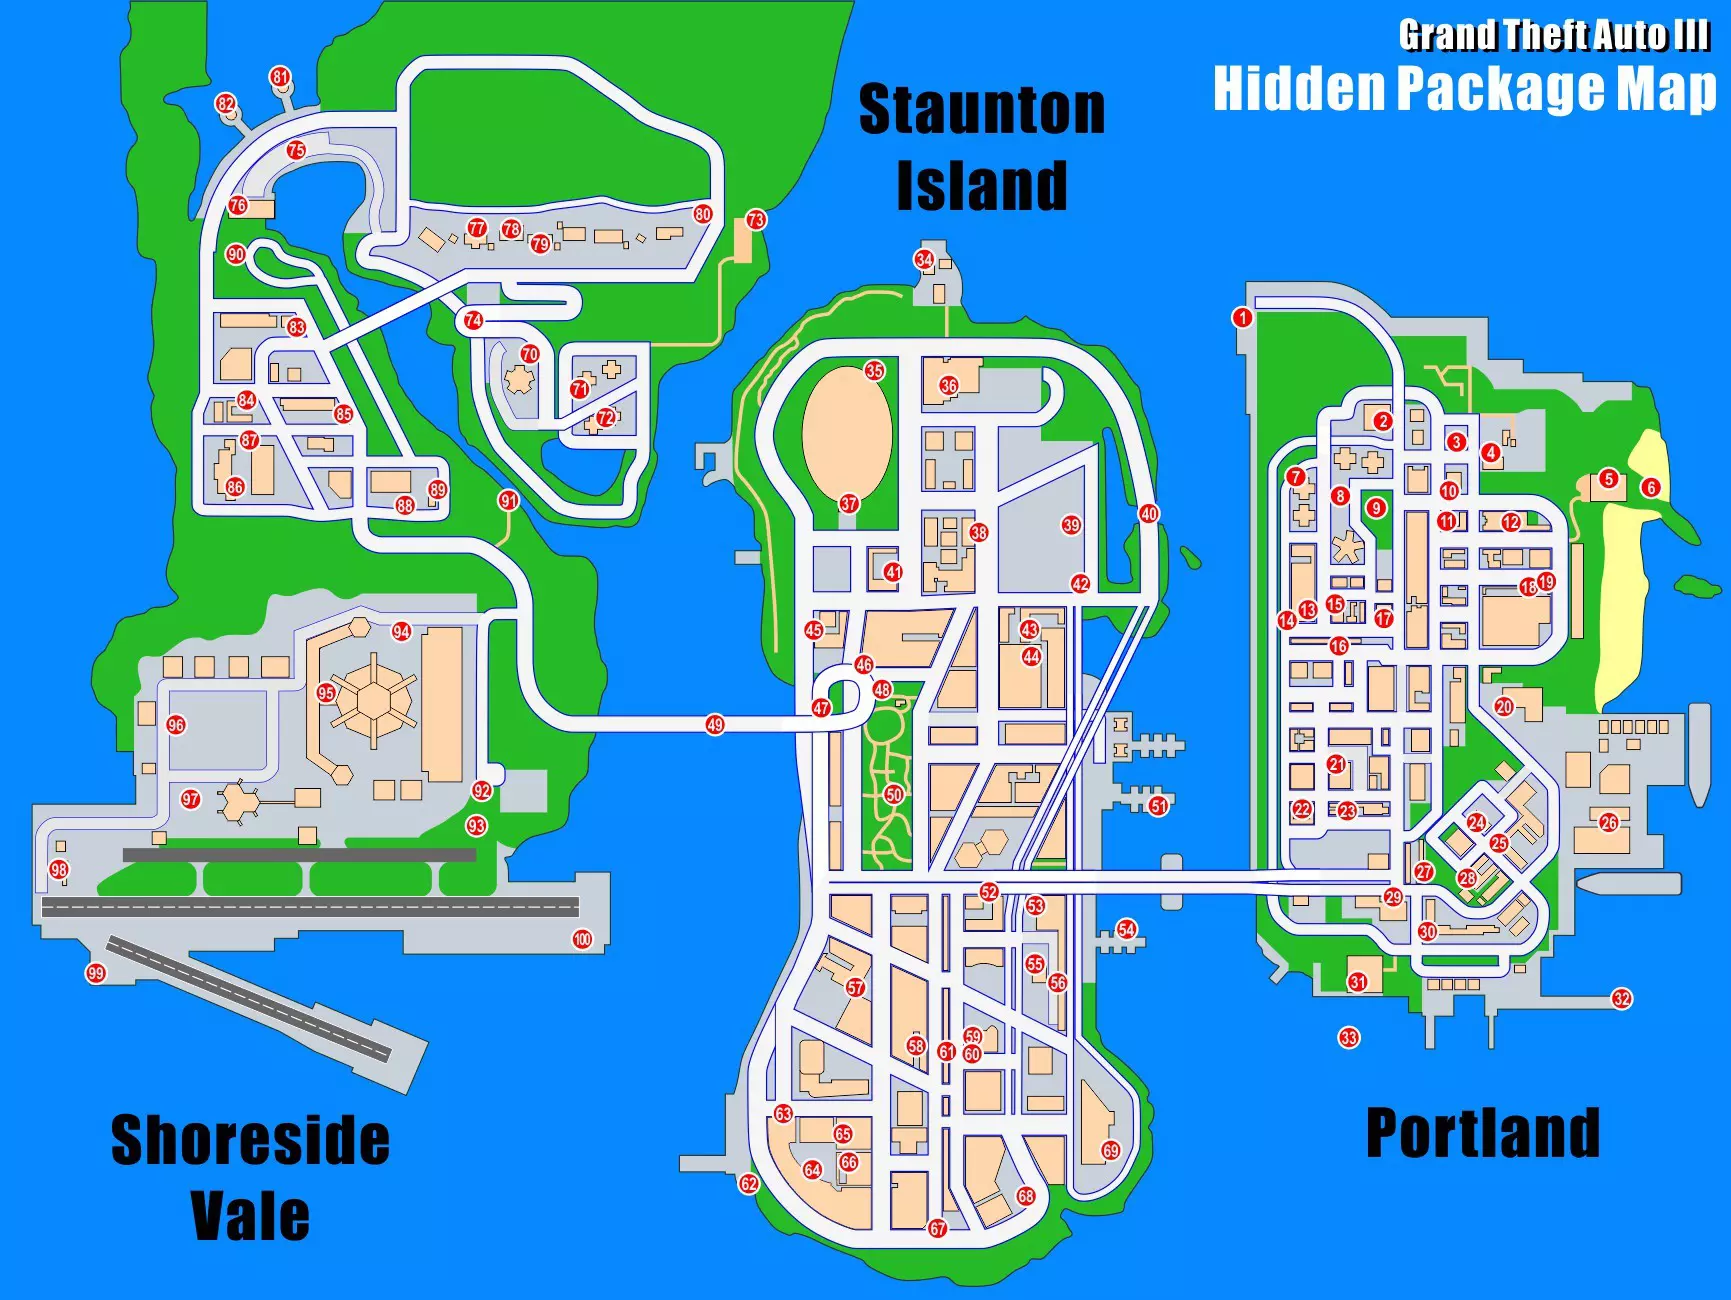 GTA III 100% Completion - Hidden Packages Map